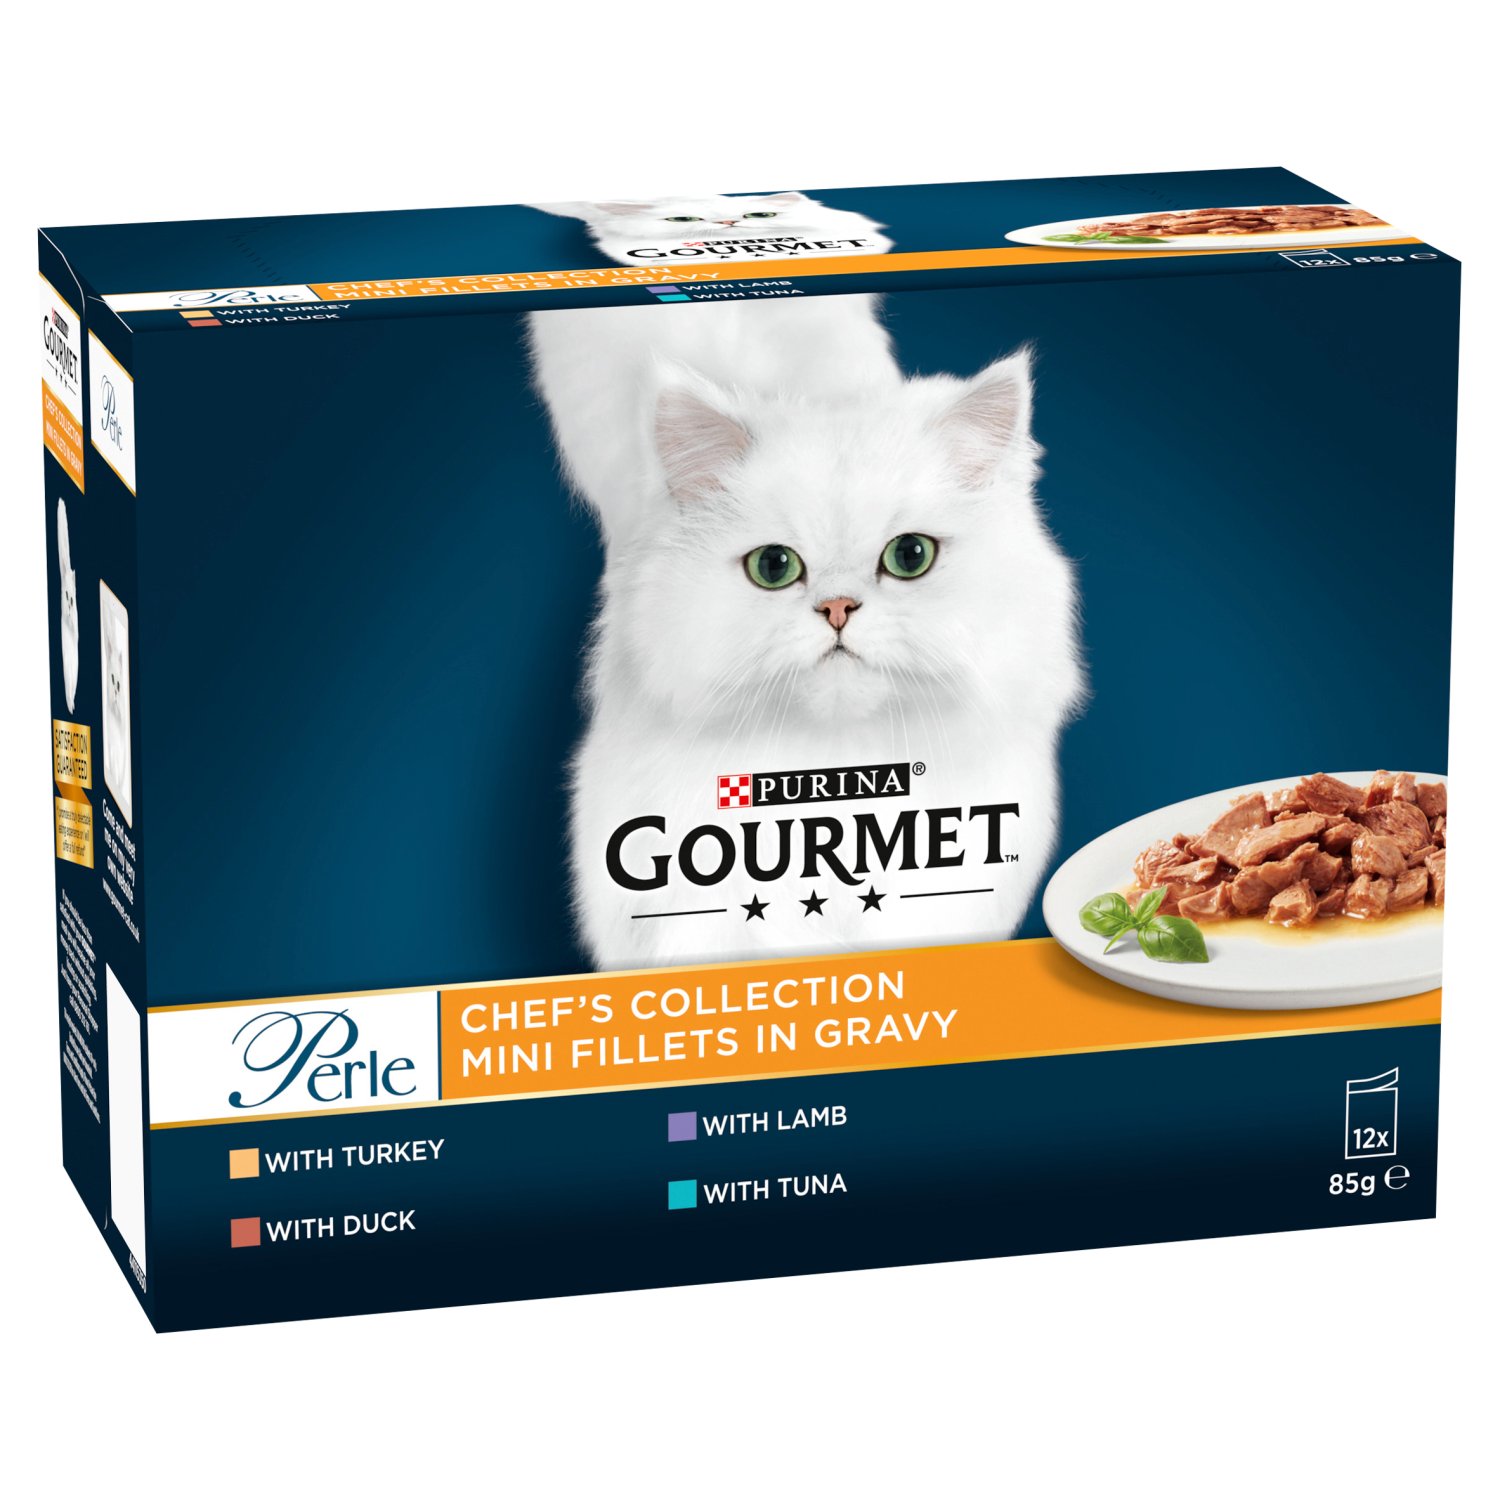 Gourmet Perle Chef's Collection Cat Food 12 Pack (1.2 kg)